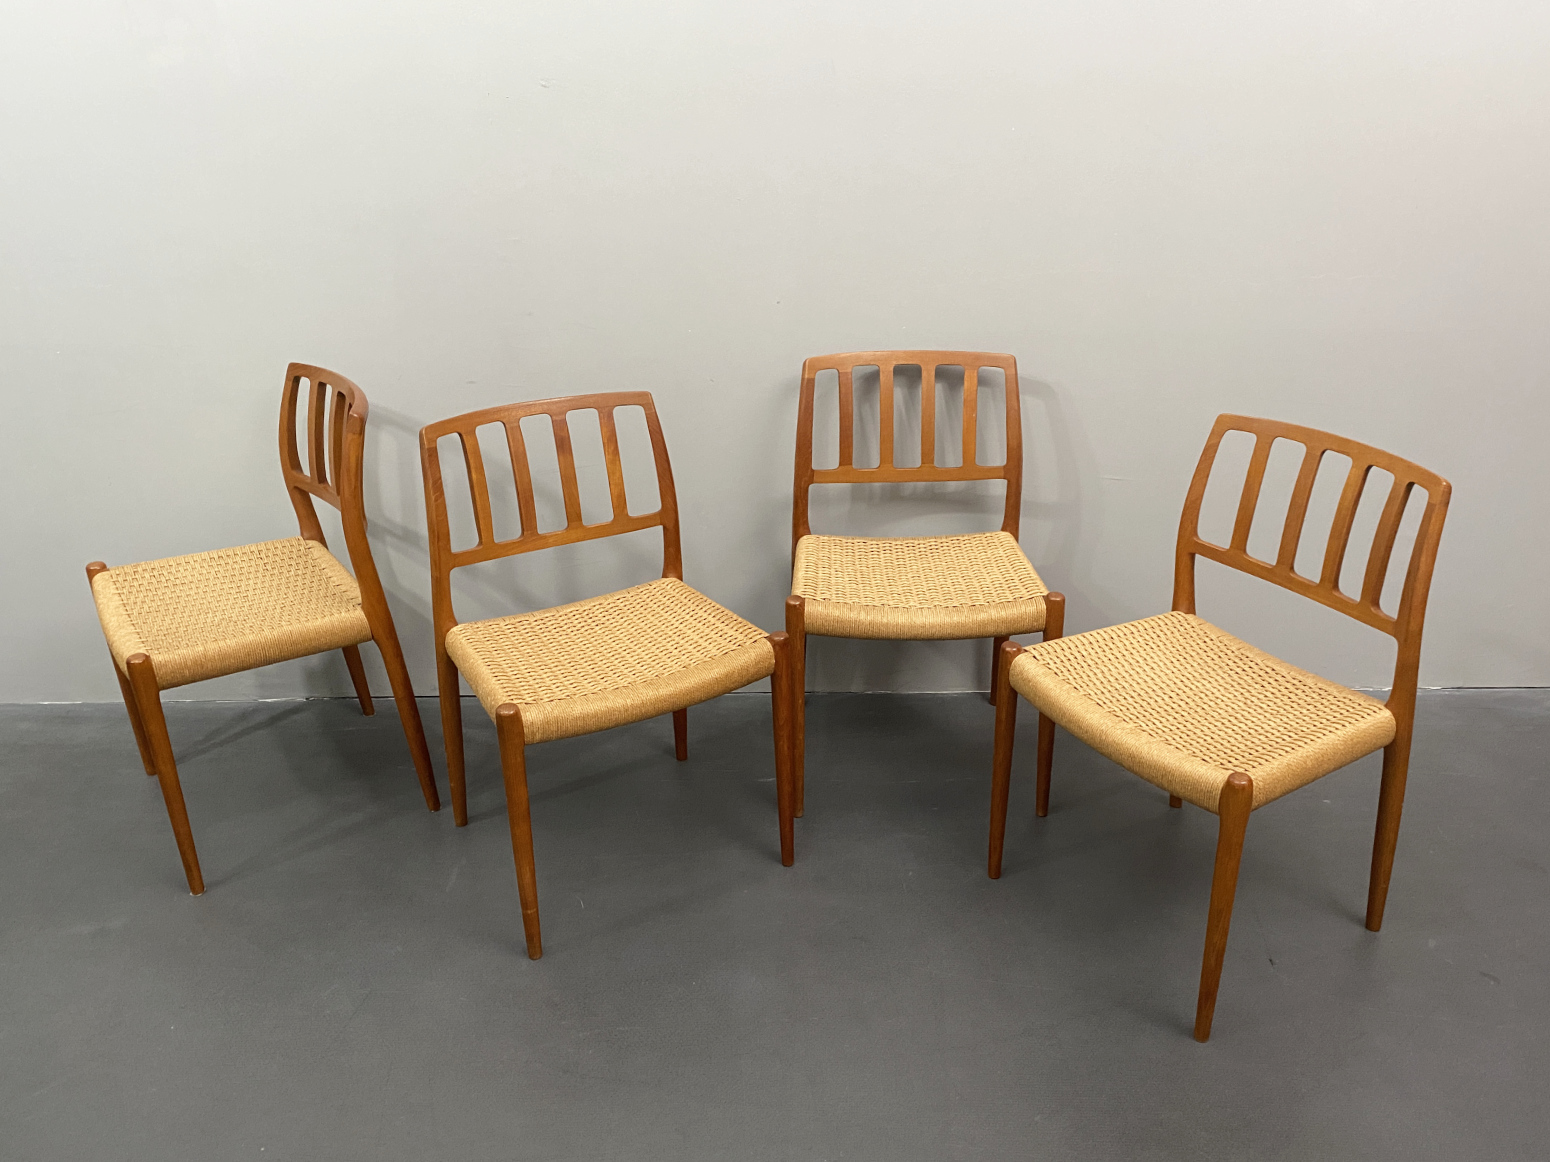 Set of 4 Dining Chairs, Teak, Model 83 by Niels Otto Möller for JL Möllers, Denmark, 1960s